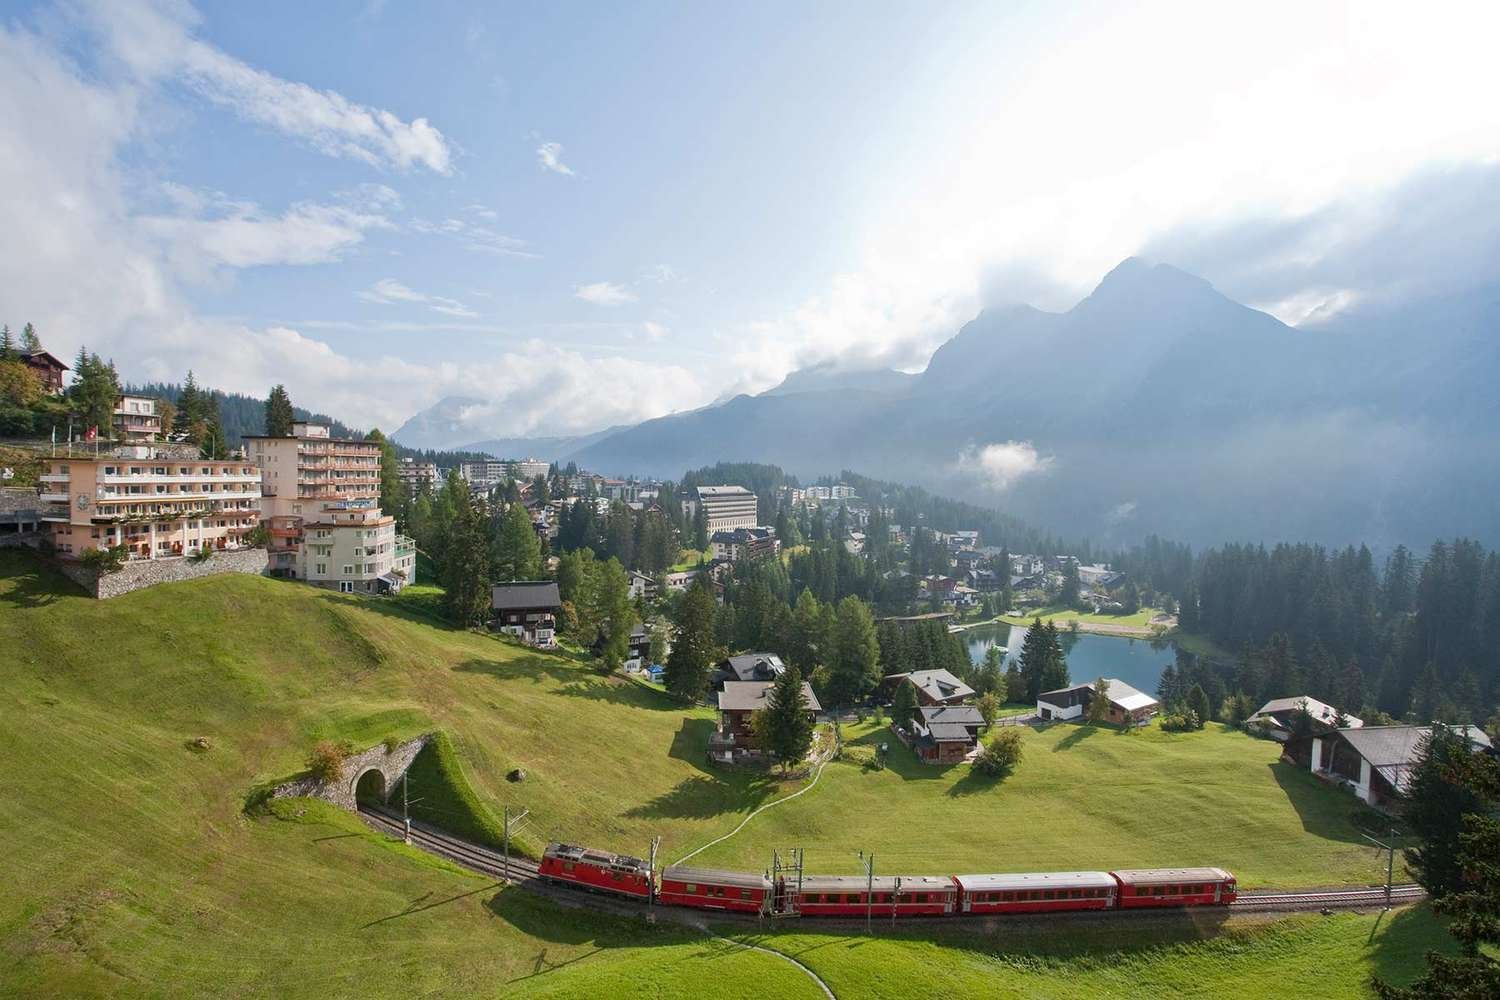 10 Charming Small Towns Around the World You Can Visit by Train